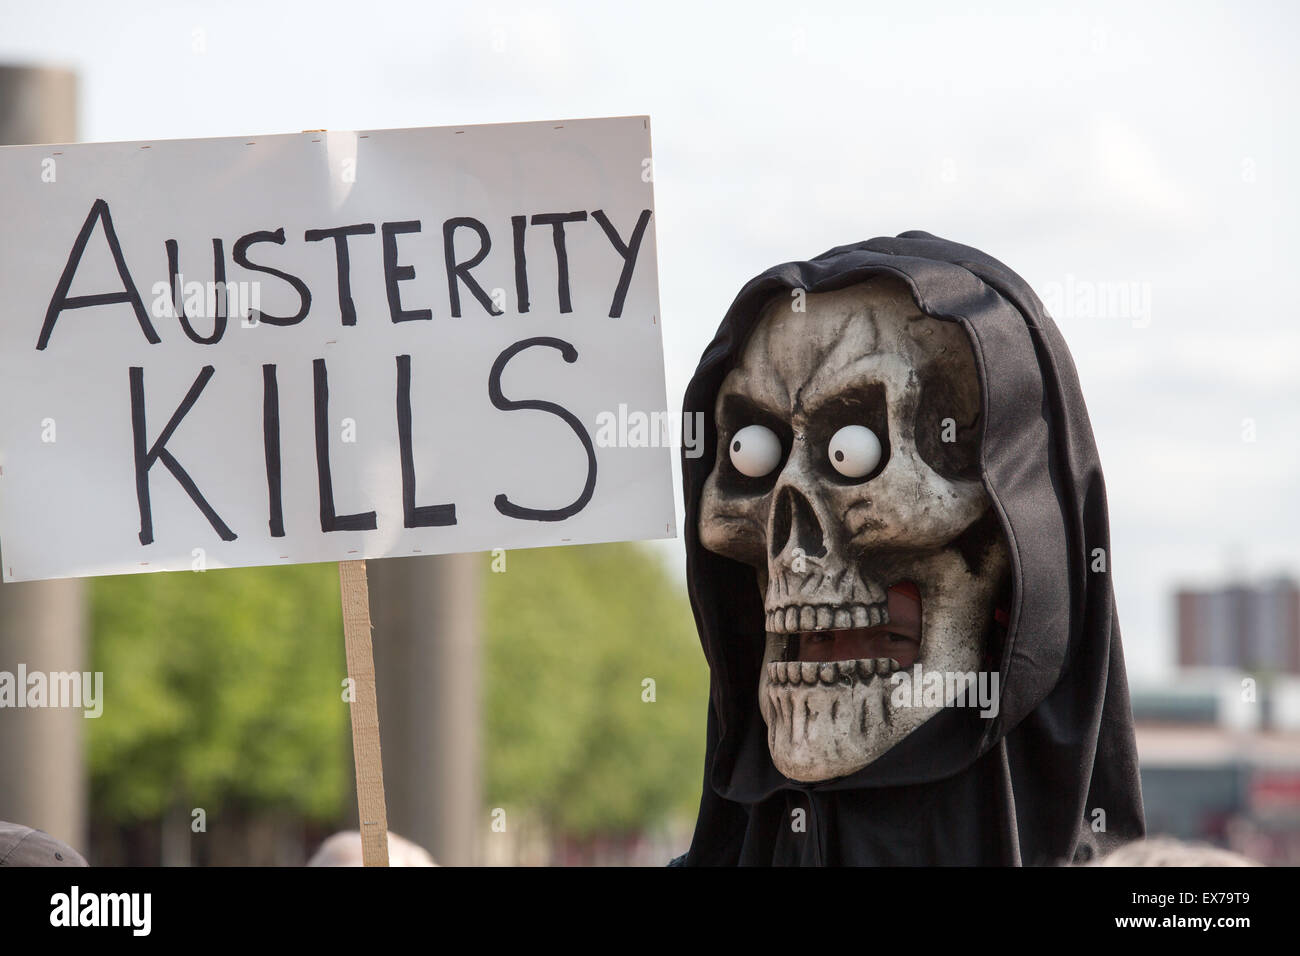 Bristol, UK. 8th July 2015. Hundreds of people gather in Bristol for a 'mass die-in' to protest the Conservative government austerity measures Credit:  Paul Smith/Alamy Live News Stock Photo